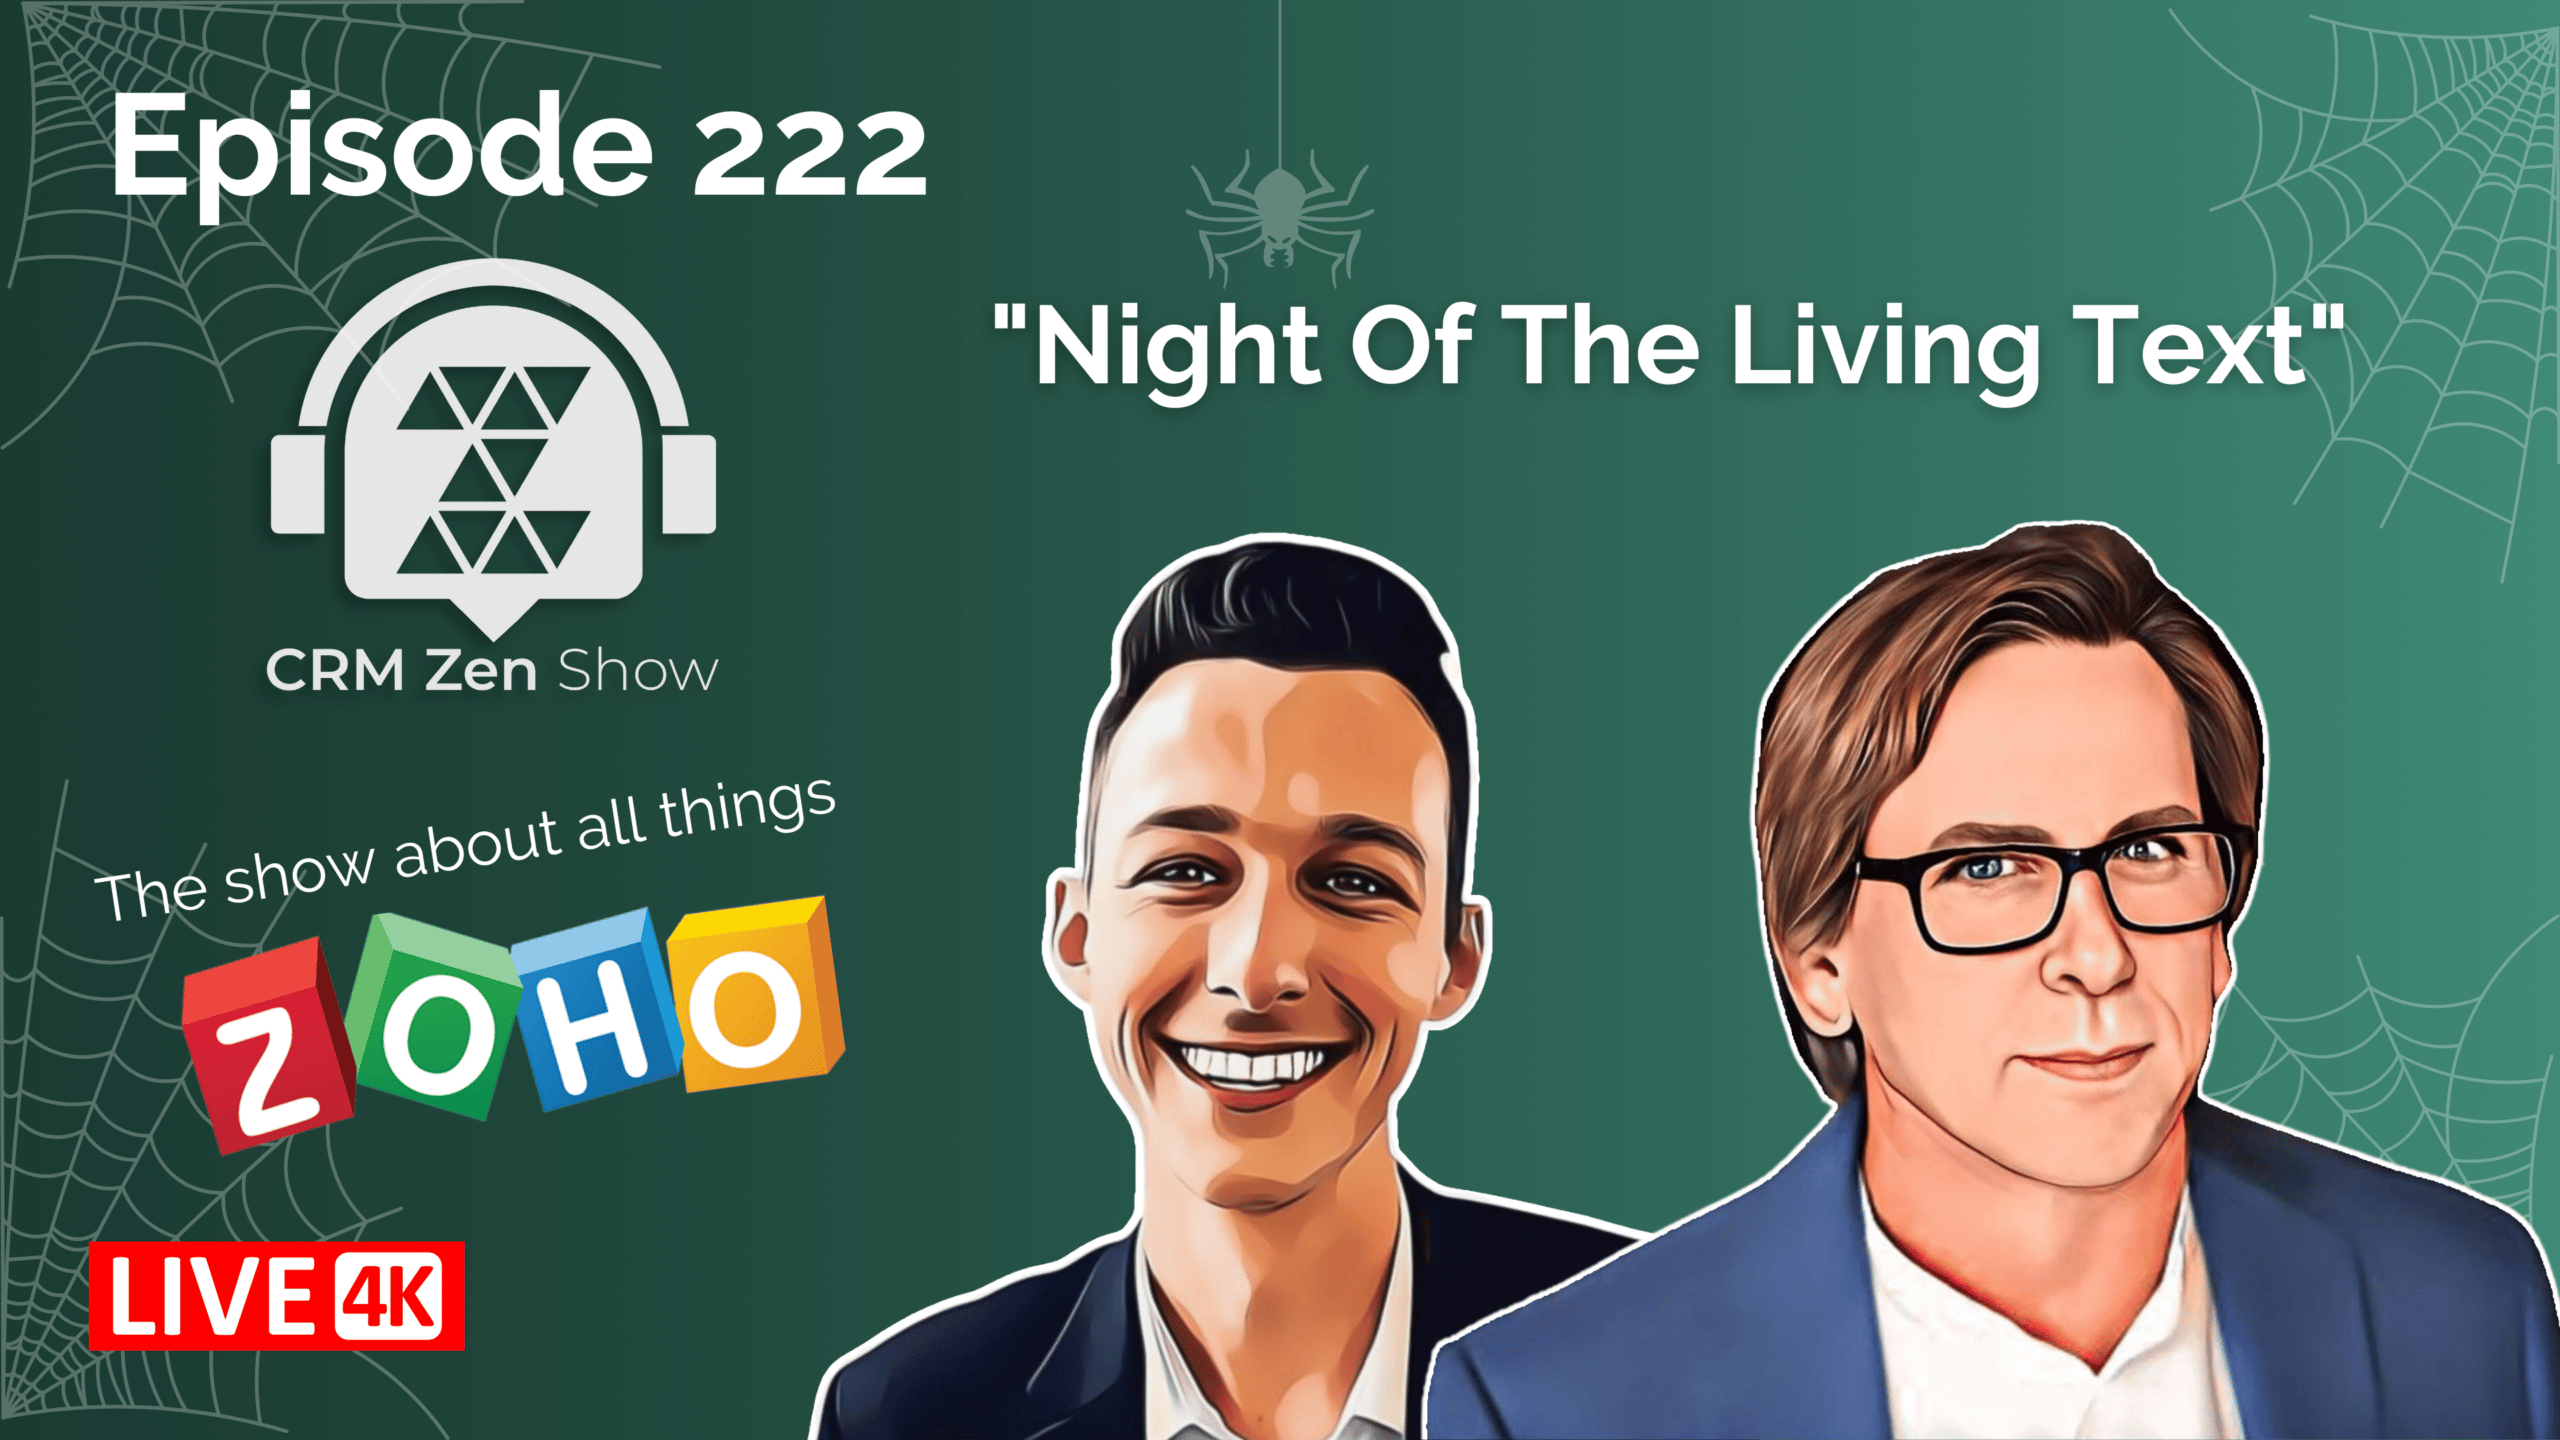 CRM Zen Show Episode 222 - Night Of the Living Text